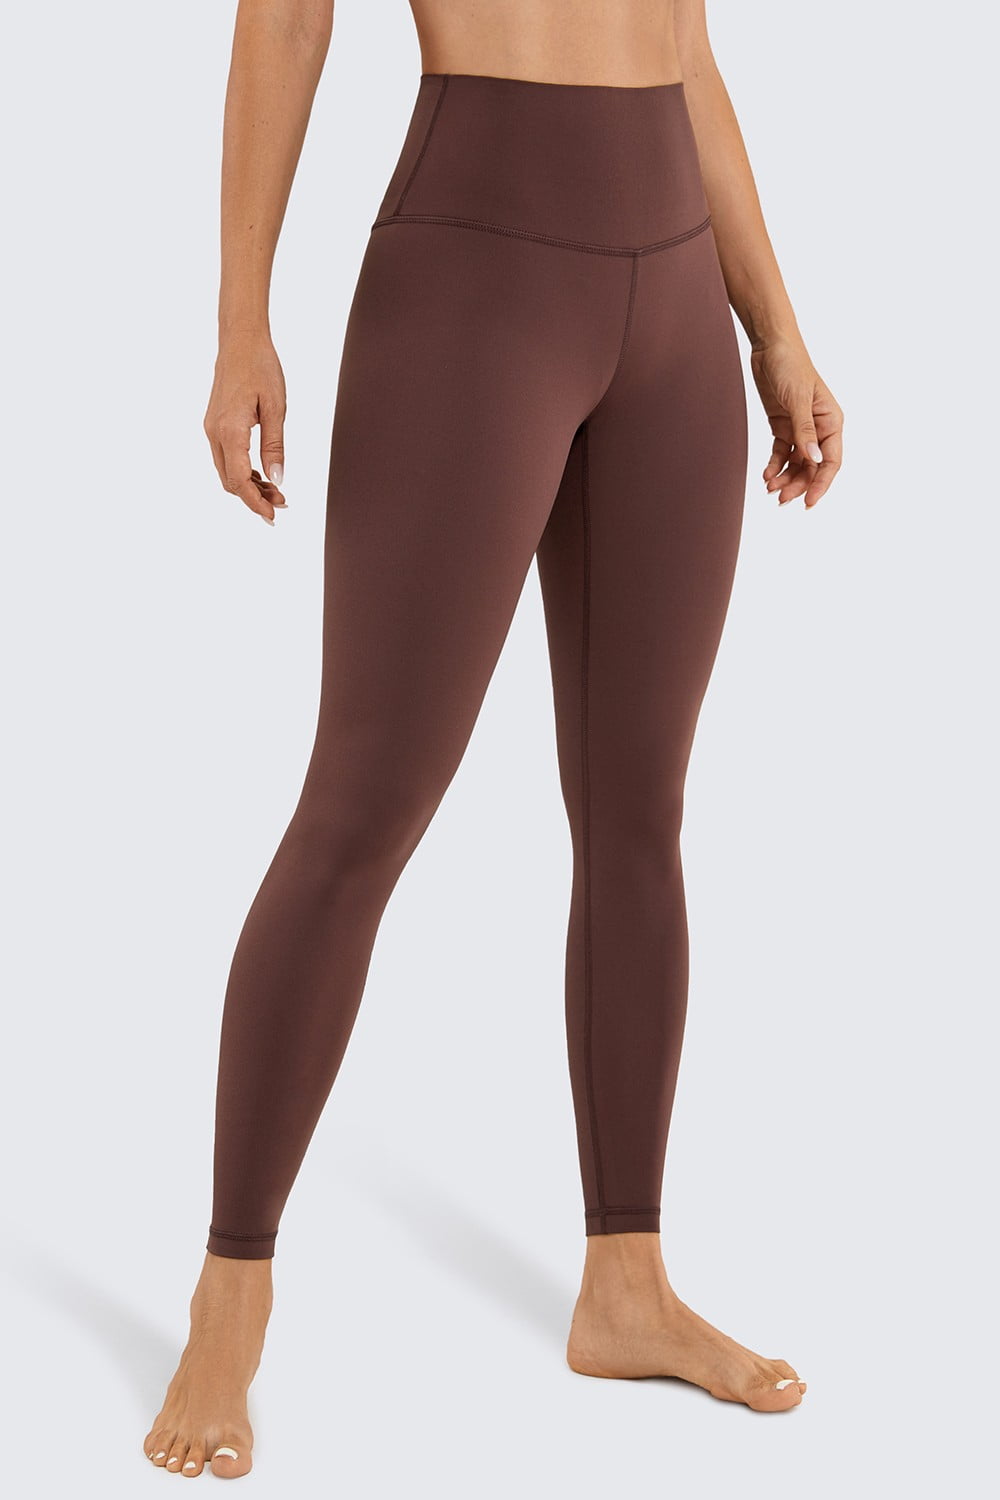 CRZ YOGA cRZ YOgA Womens Butterluxe cross Waist Workout Leggings 25 Inches  - V crossover High Waisted gym Athletic Yoga Leggings Taupe Sm